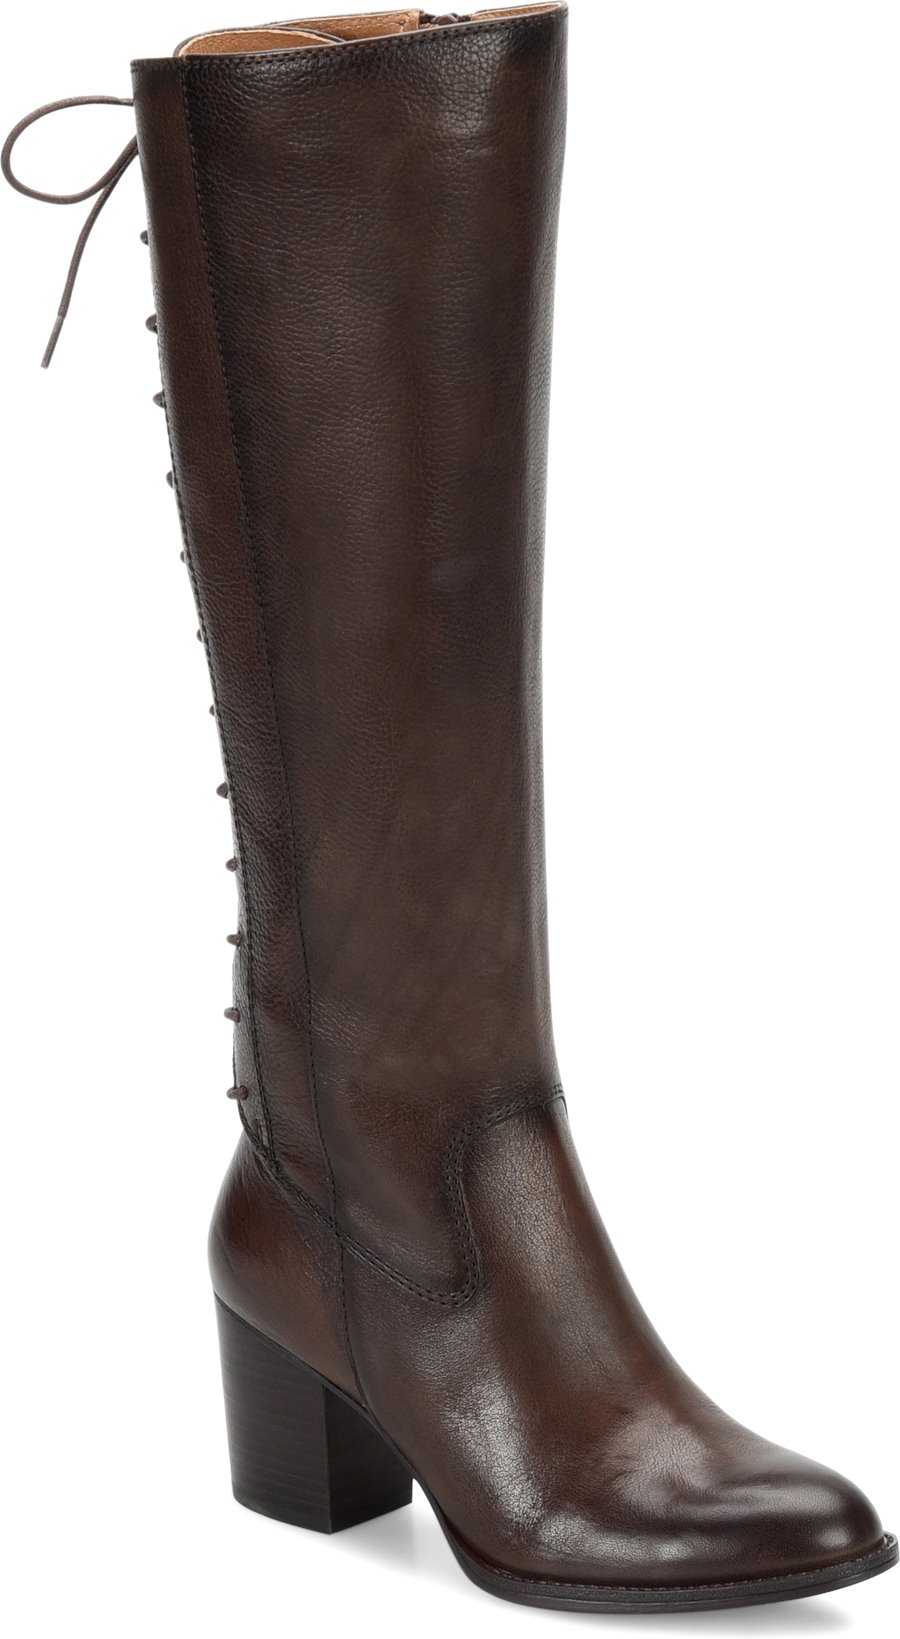 Sofft Wheaton in Brown - Sofft Womens Boots on Shoeline.com